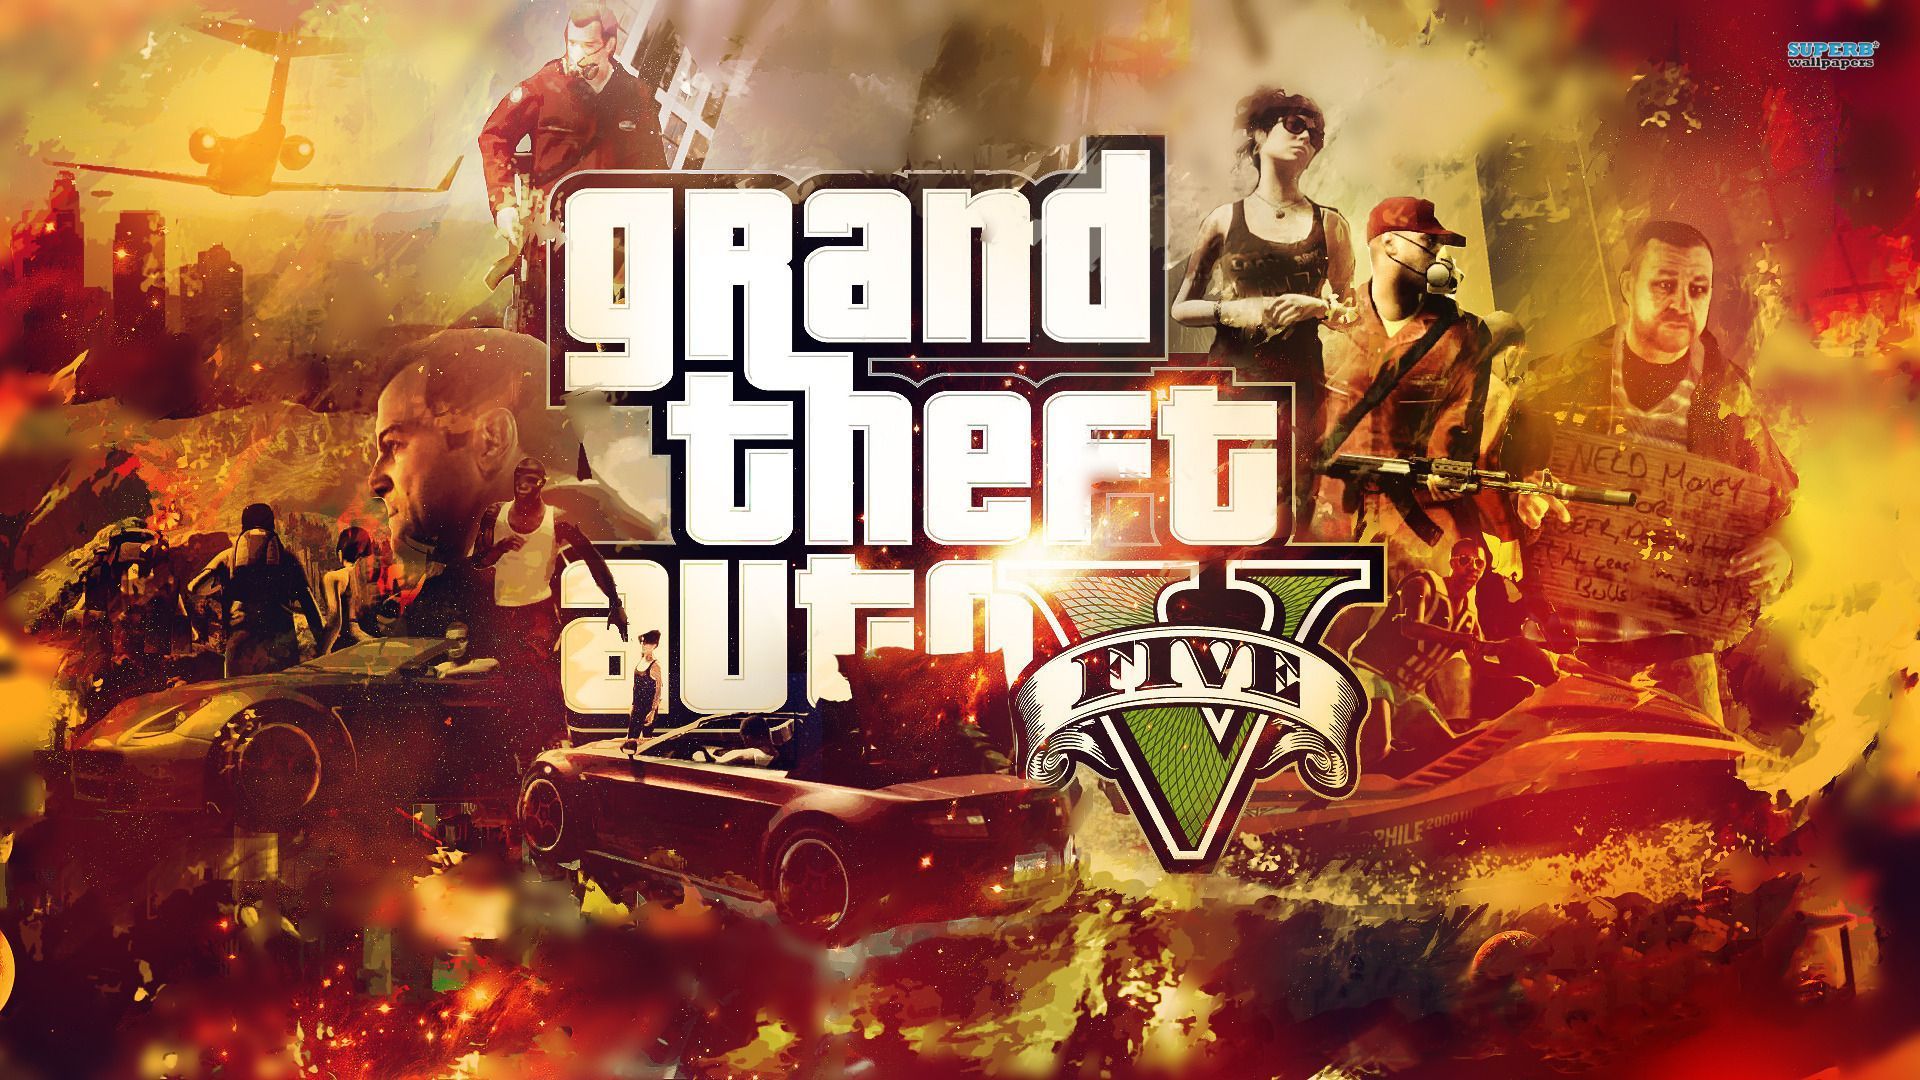 GTA 5 Game Hd Wallpapers Onlybackground